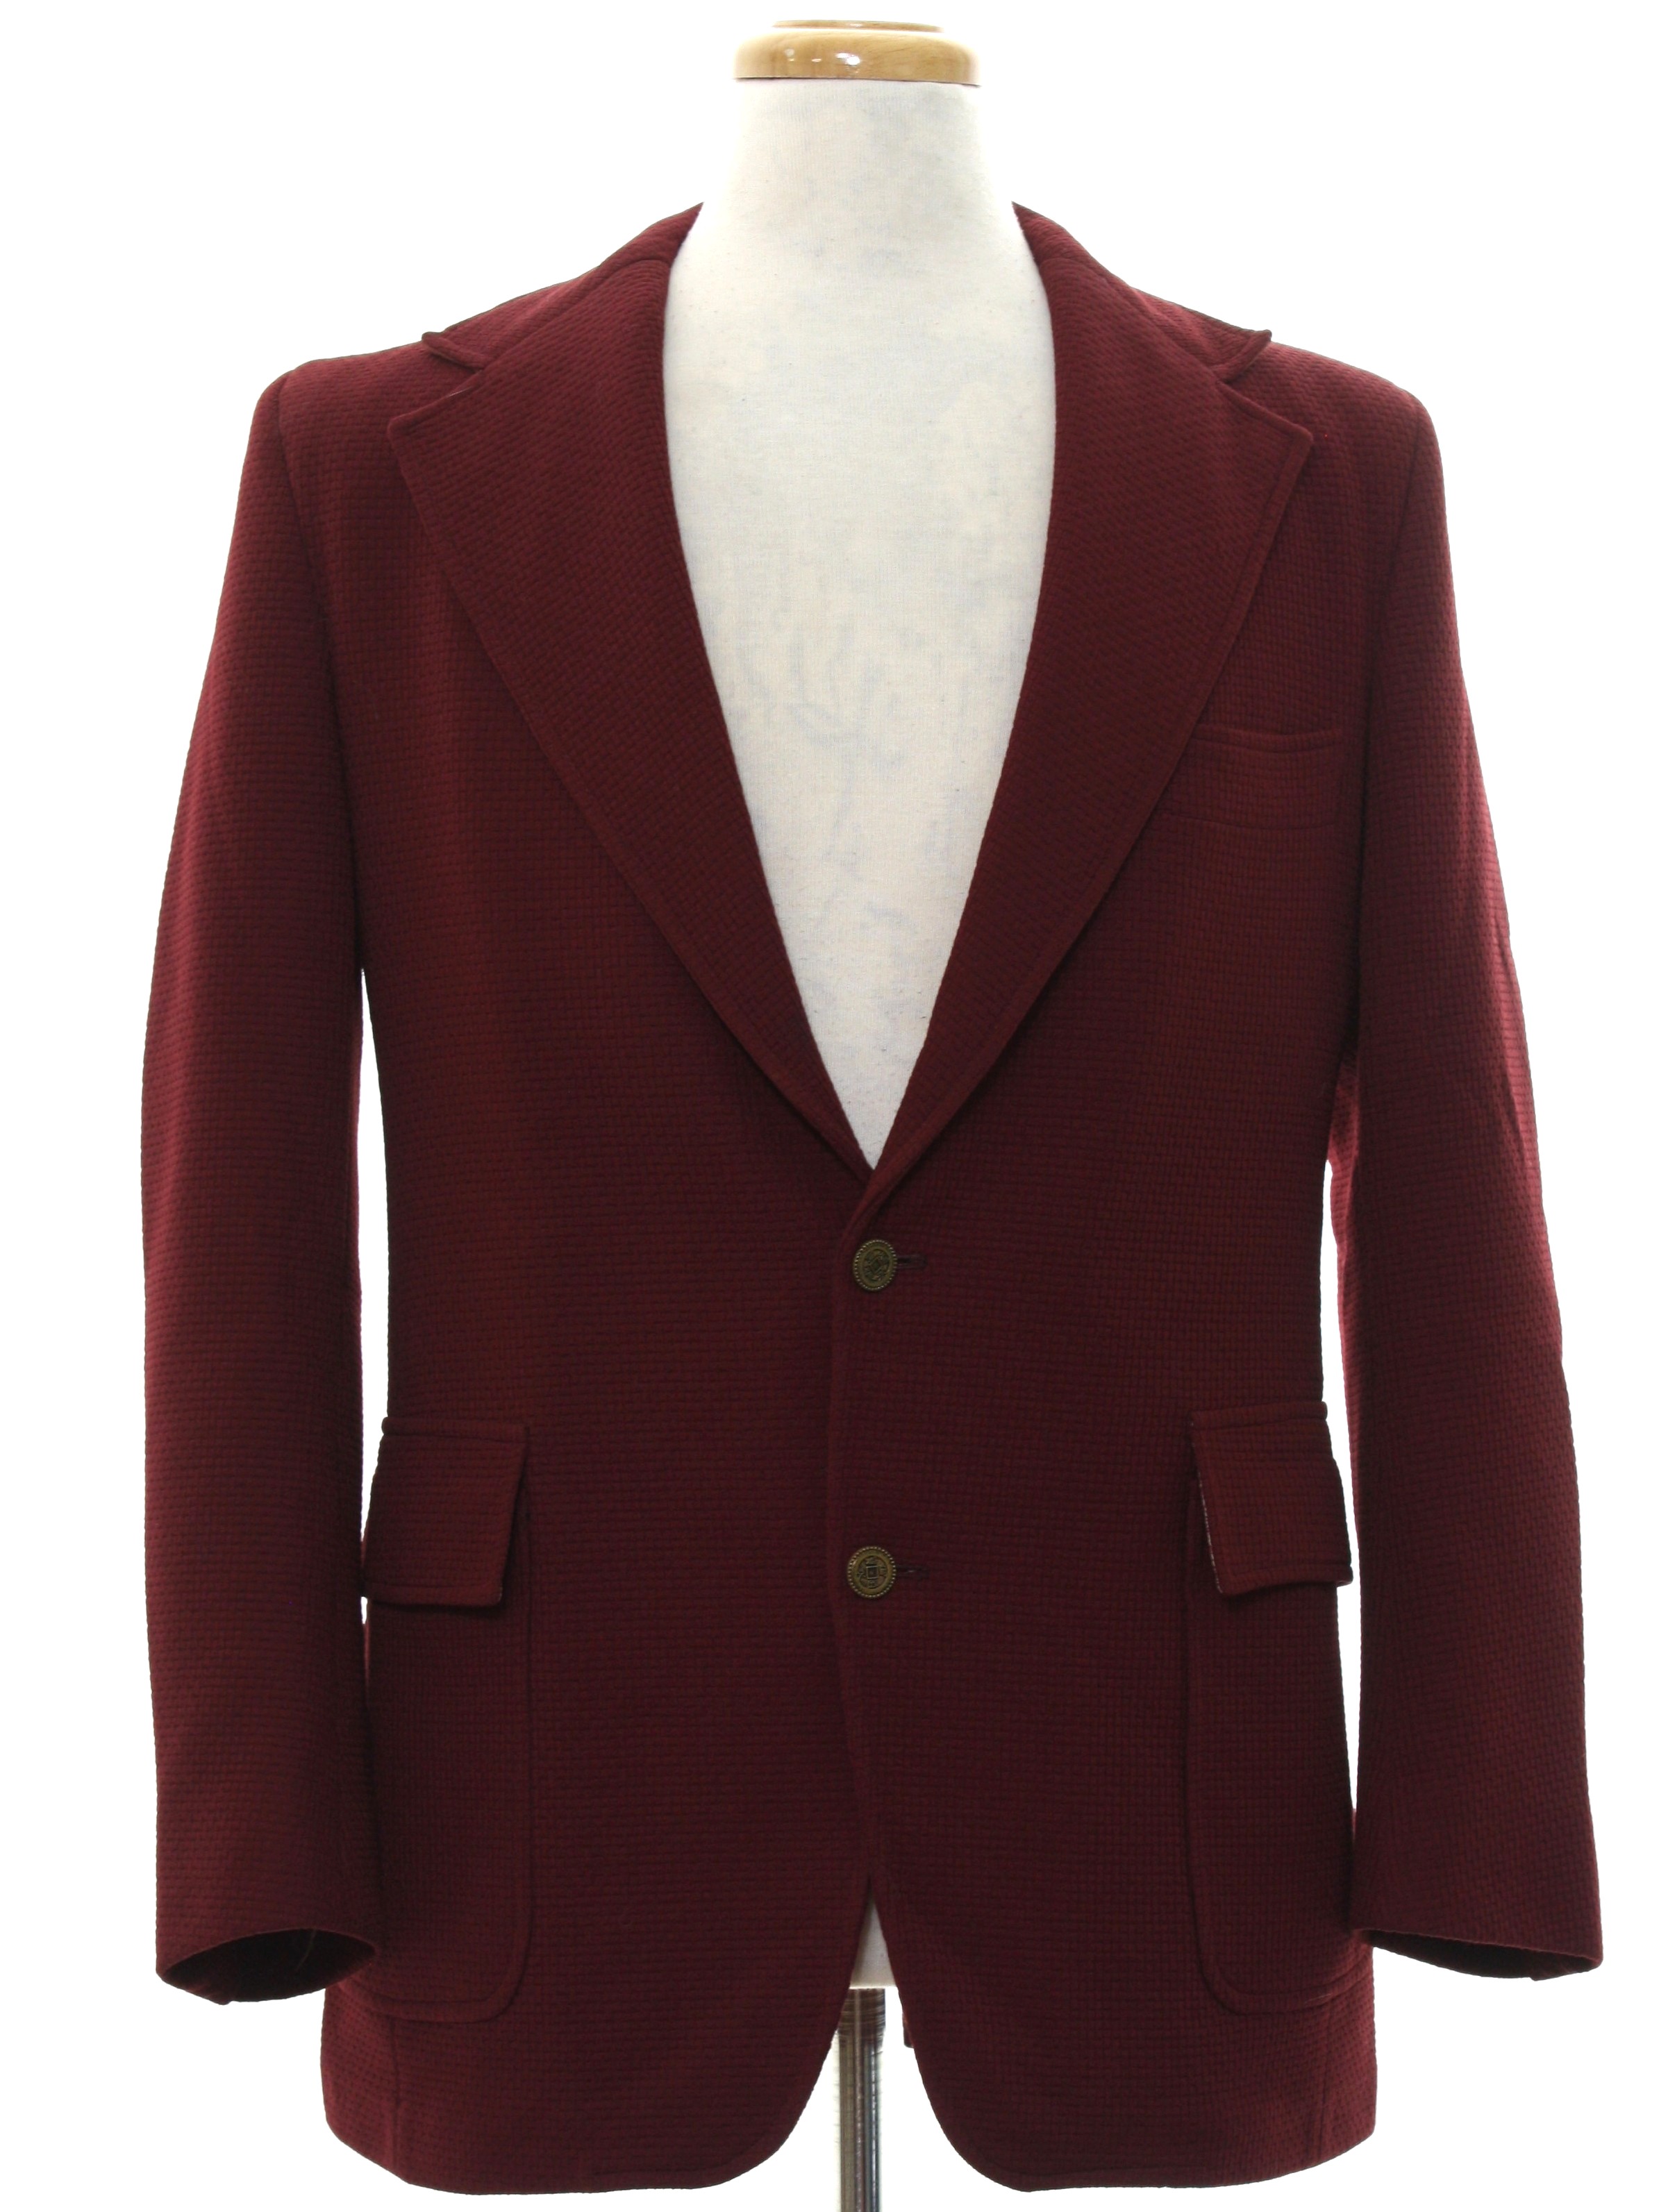 Retro Seventies Jacket: 70s -Continental Club- Mens burgundy with ...